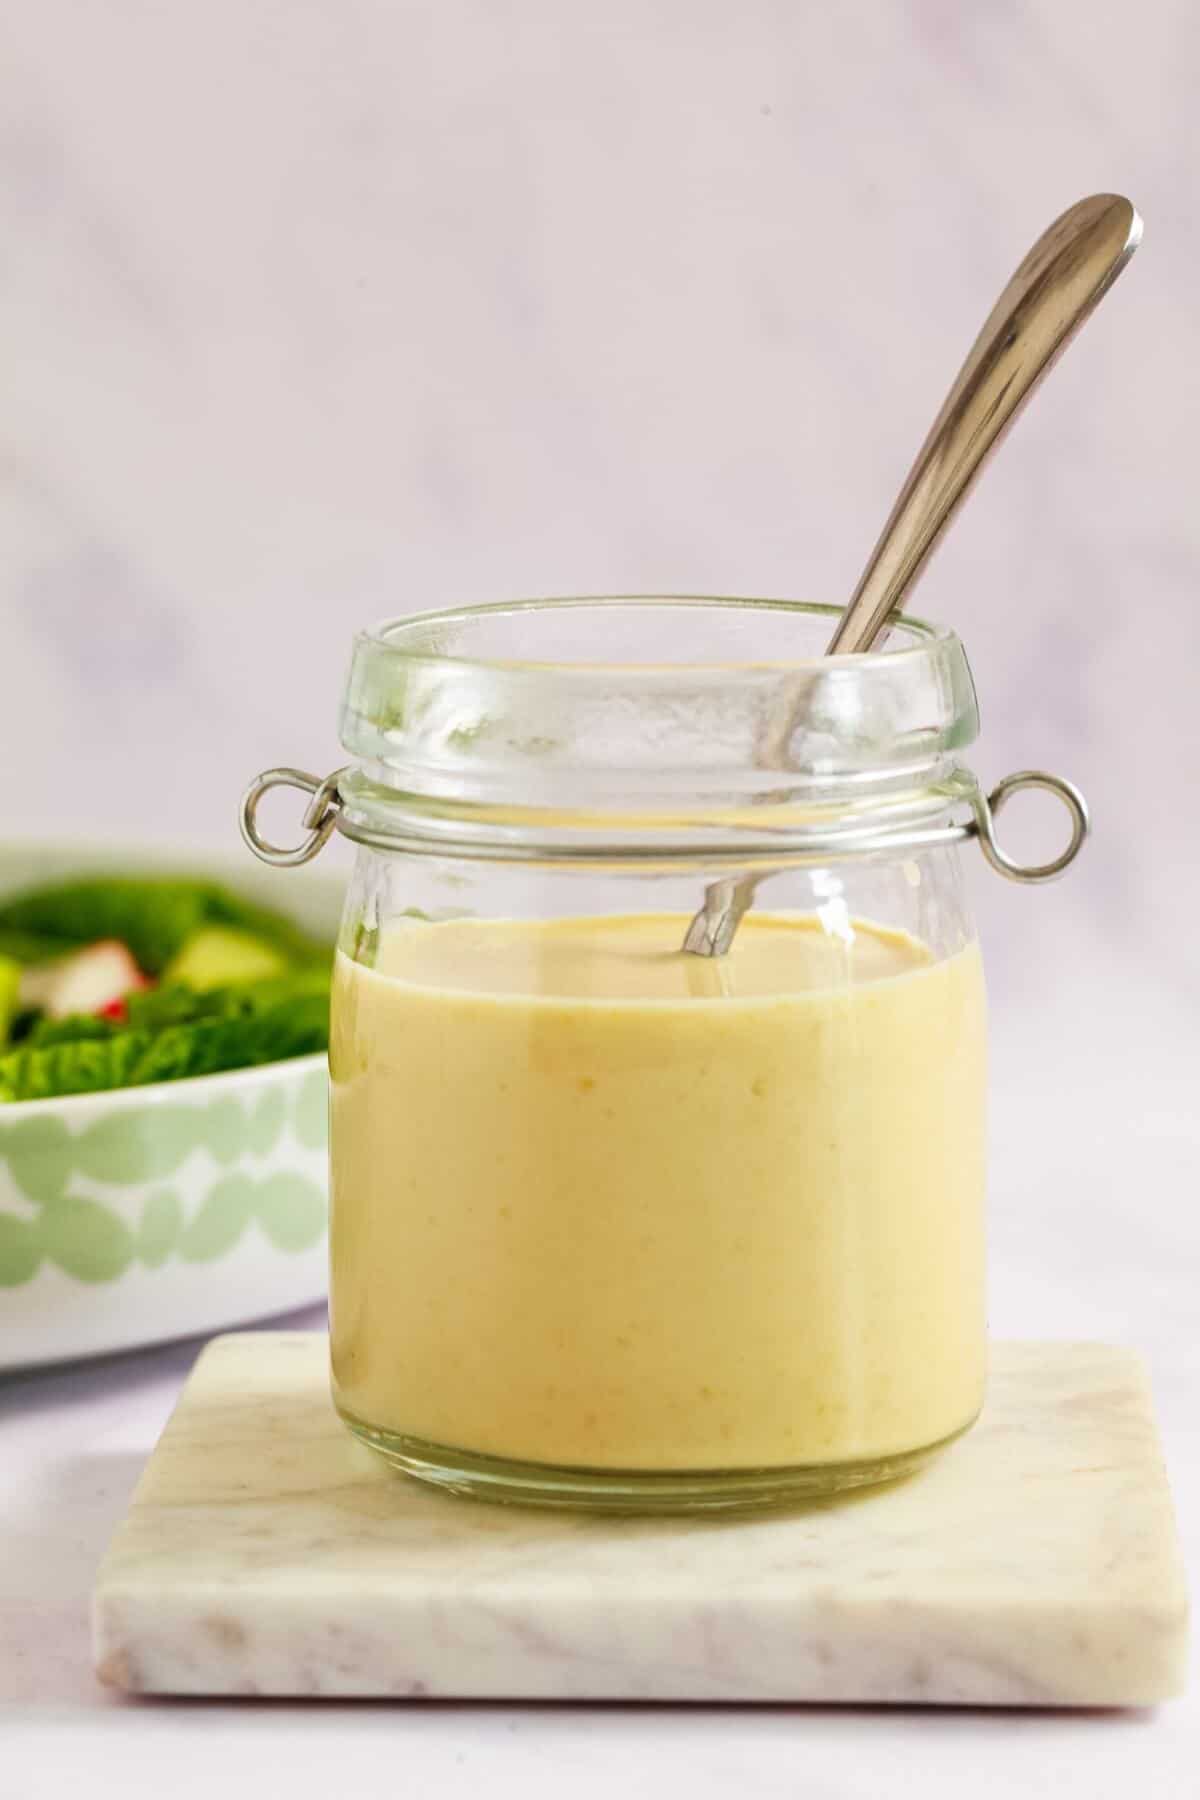 A open glass jar of salad dressing with a silver spoon sticking out of the top. The jar sits on a marble coaster with a salad bowl behind.